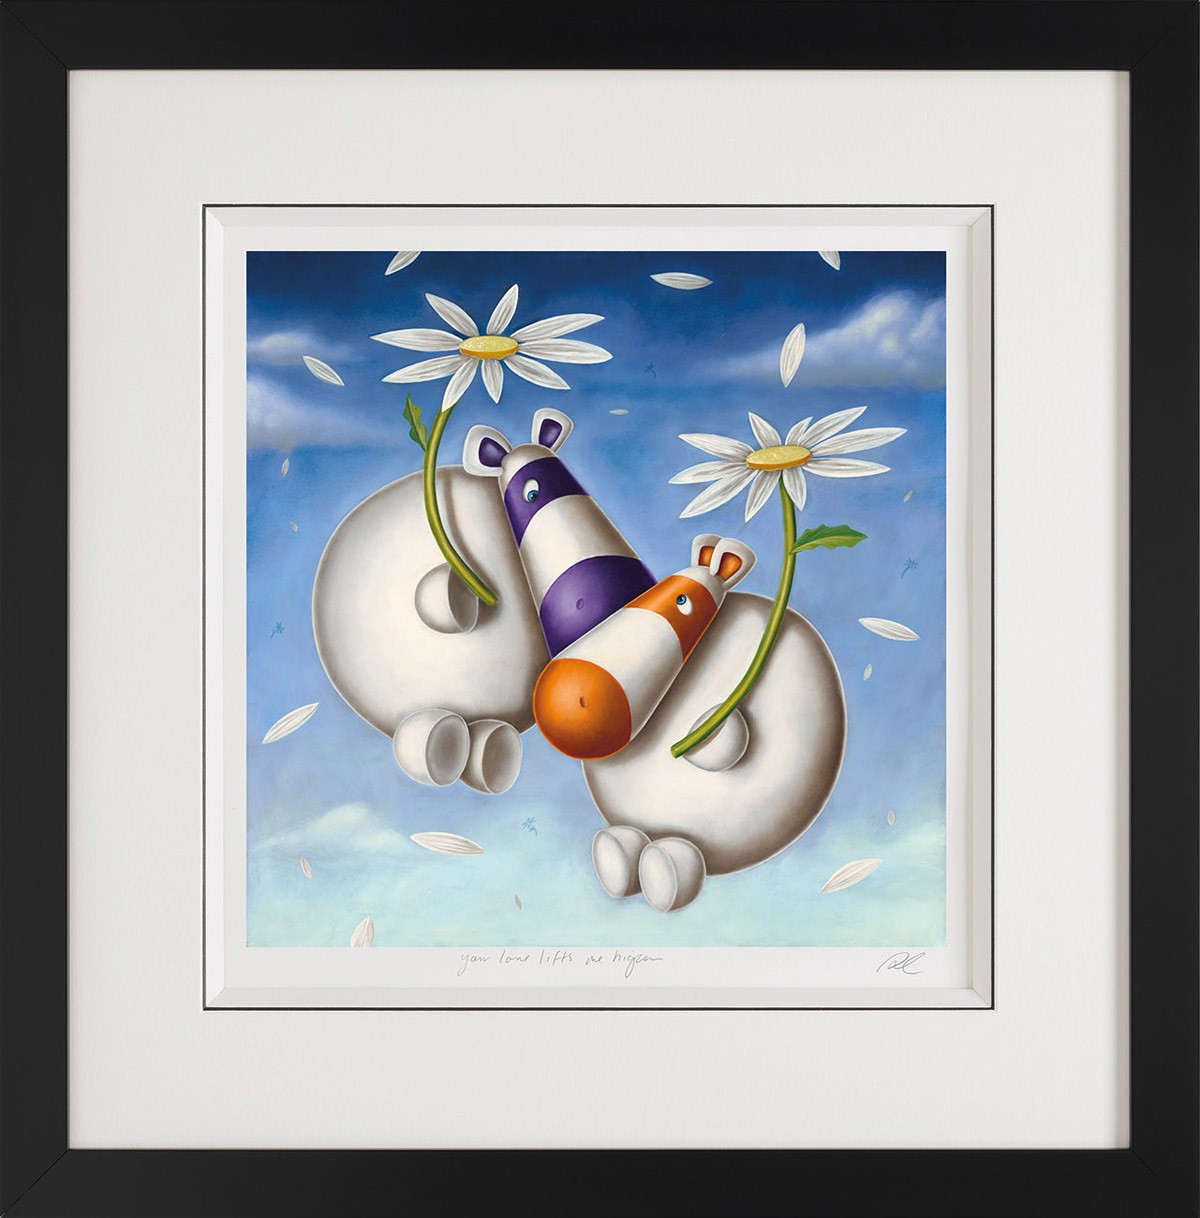 Your Love Lifts me Higher by Peter Smith, Couple | Love | Romance